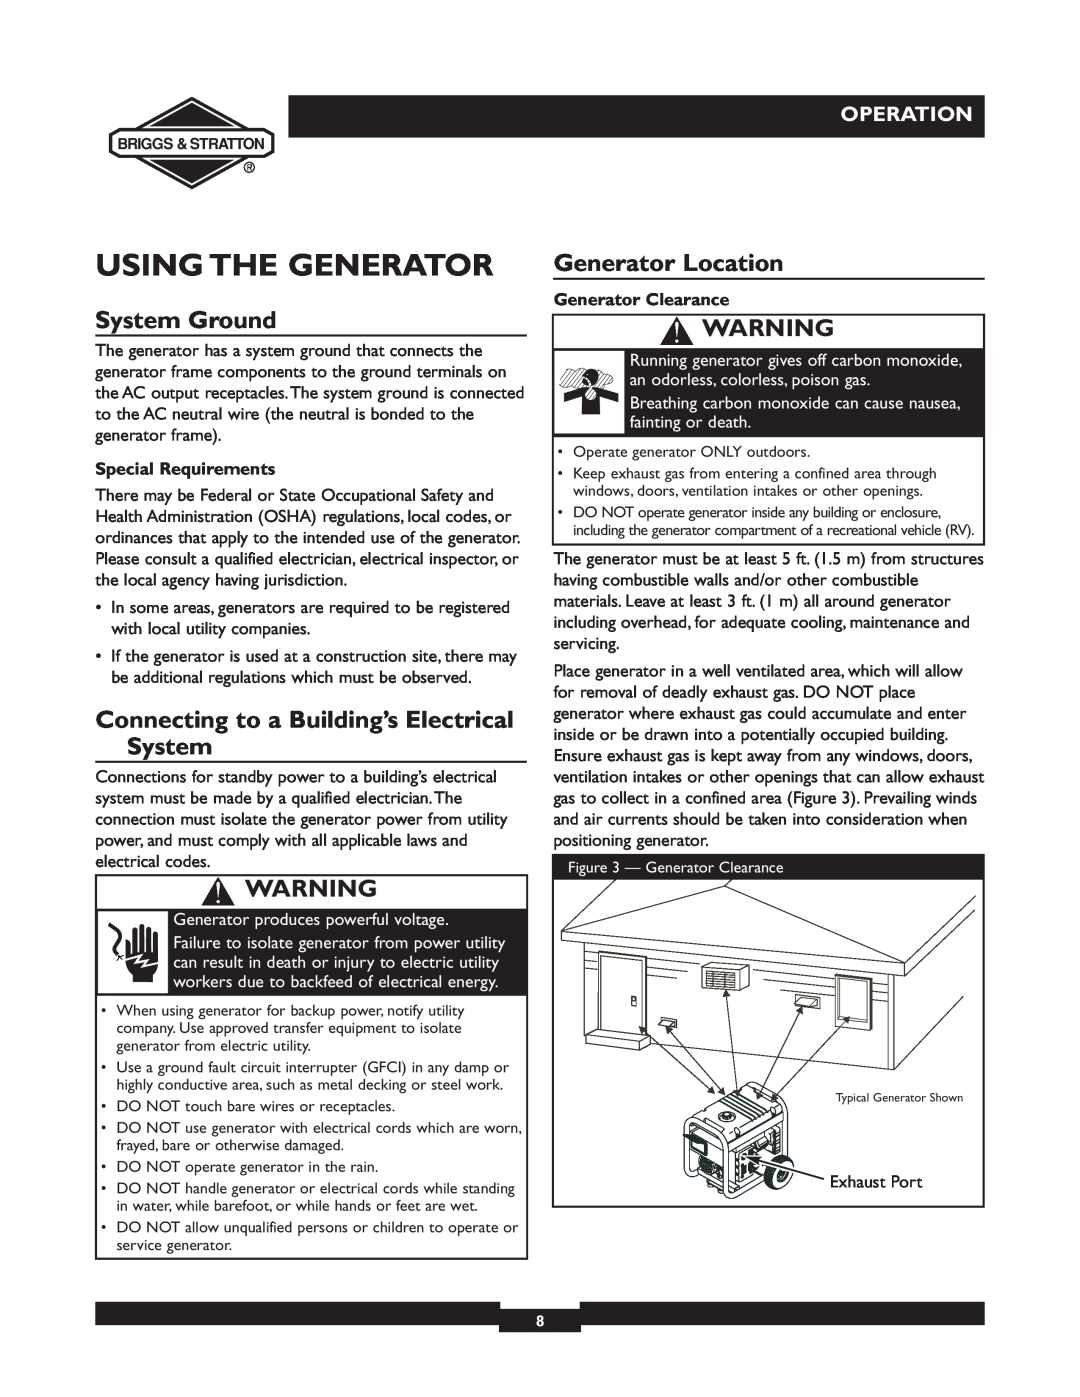 Briggs & Stratton 30238 Using The Generator, System Ground, Connecting to a Building’s Electrical System, Operation 